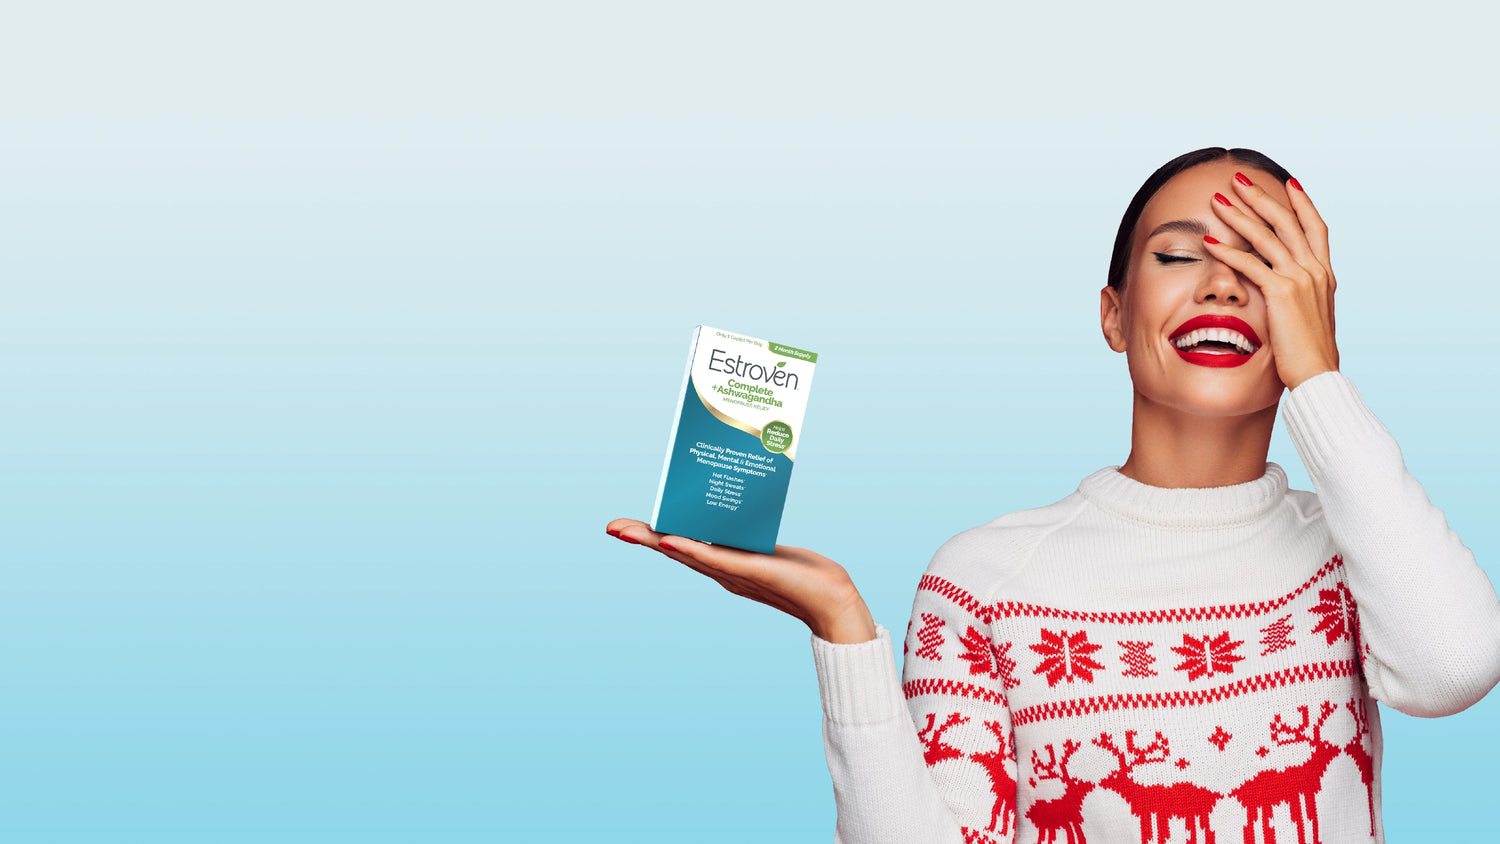 Woman in a holiday sweater holding up an Estroven product promoting the holiday sale 25% off.